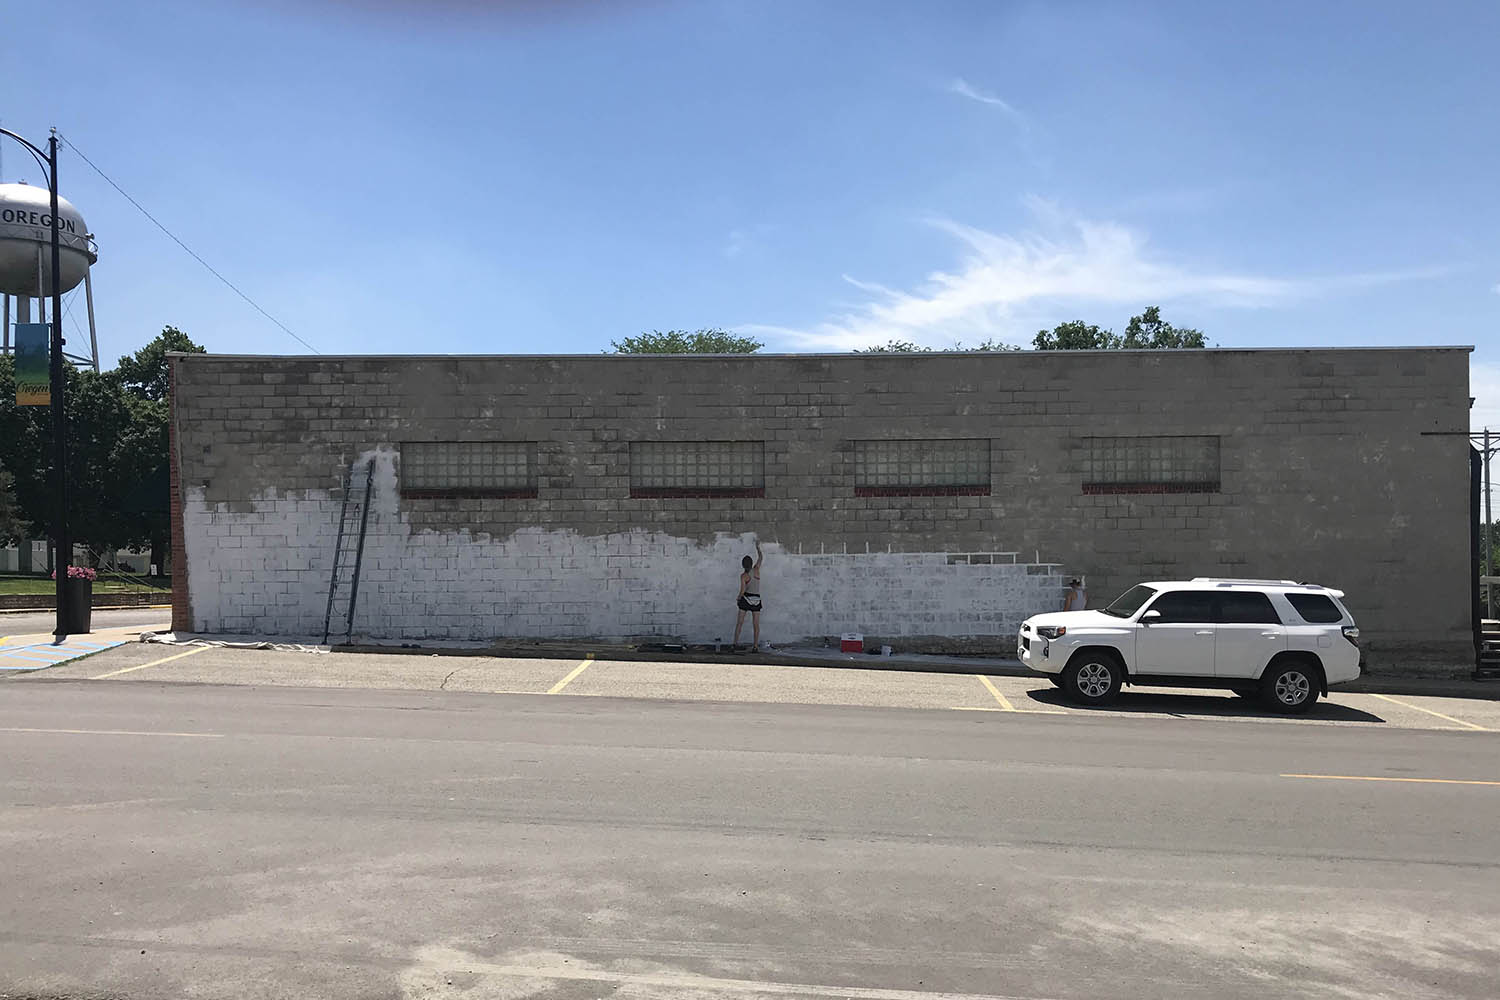 Northwest art students Shelby Theis and Sierra Scott began painting their mural on an exterior wall of the South Holt Family Medical building in Oregon, Missouri, in June ... 